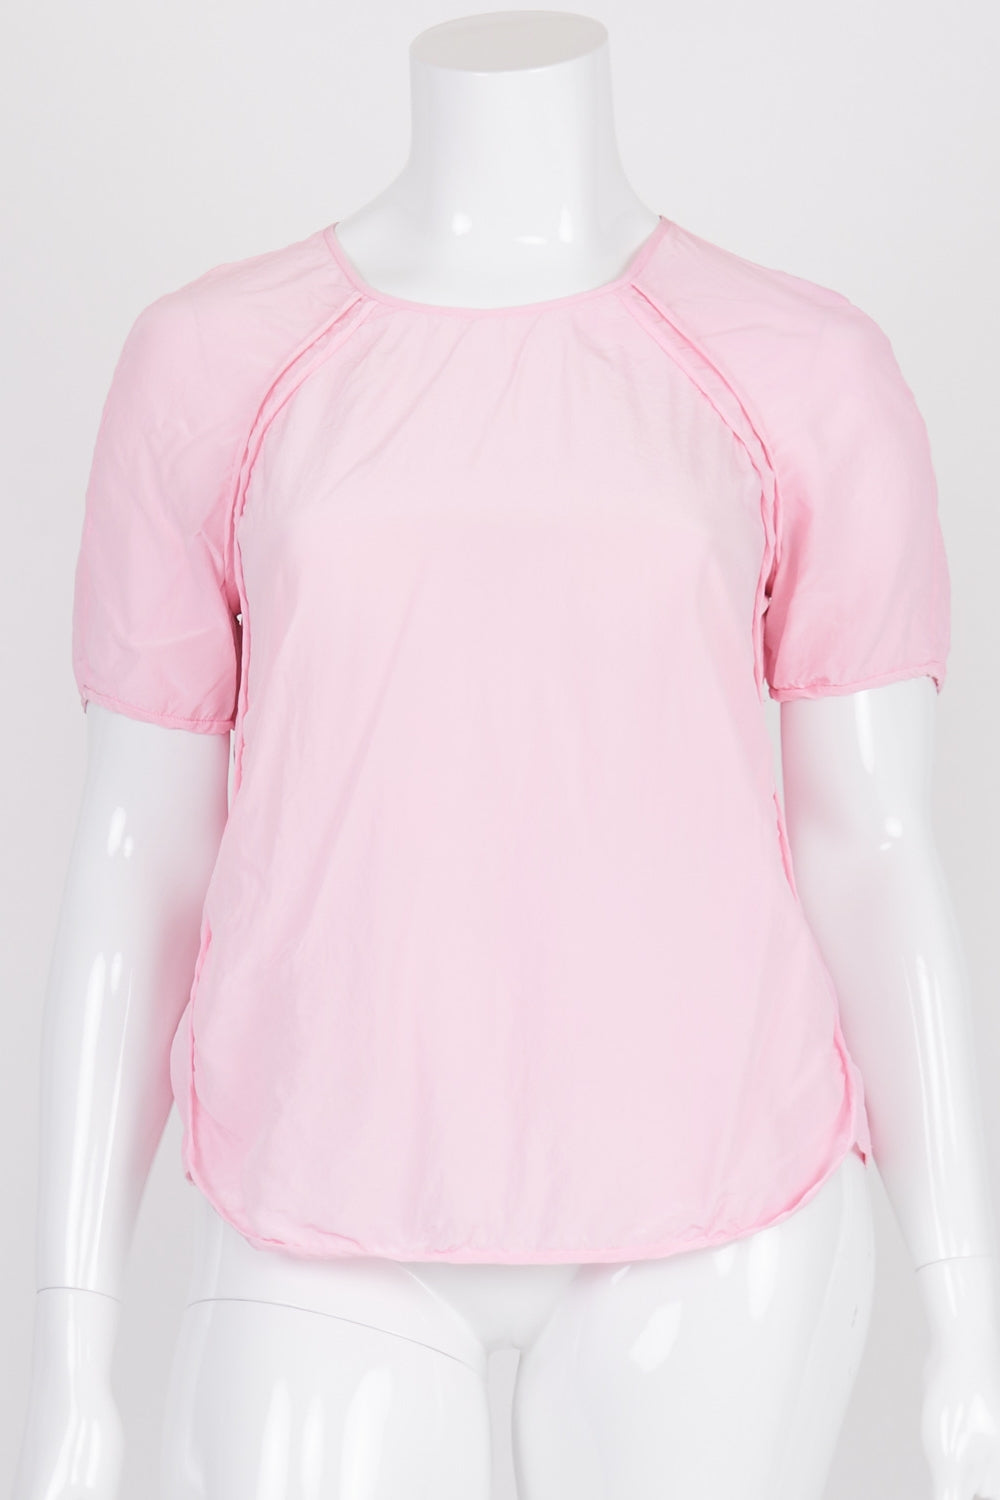 Country Road Pink Silk Top XL